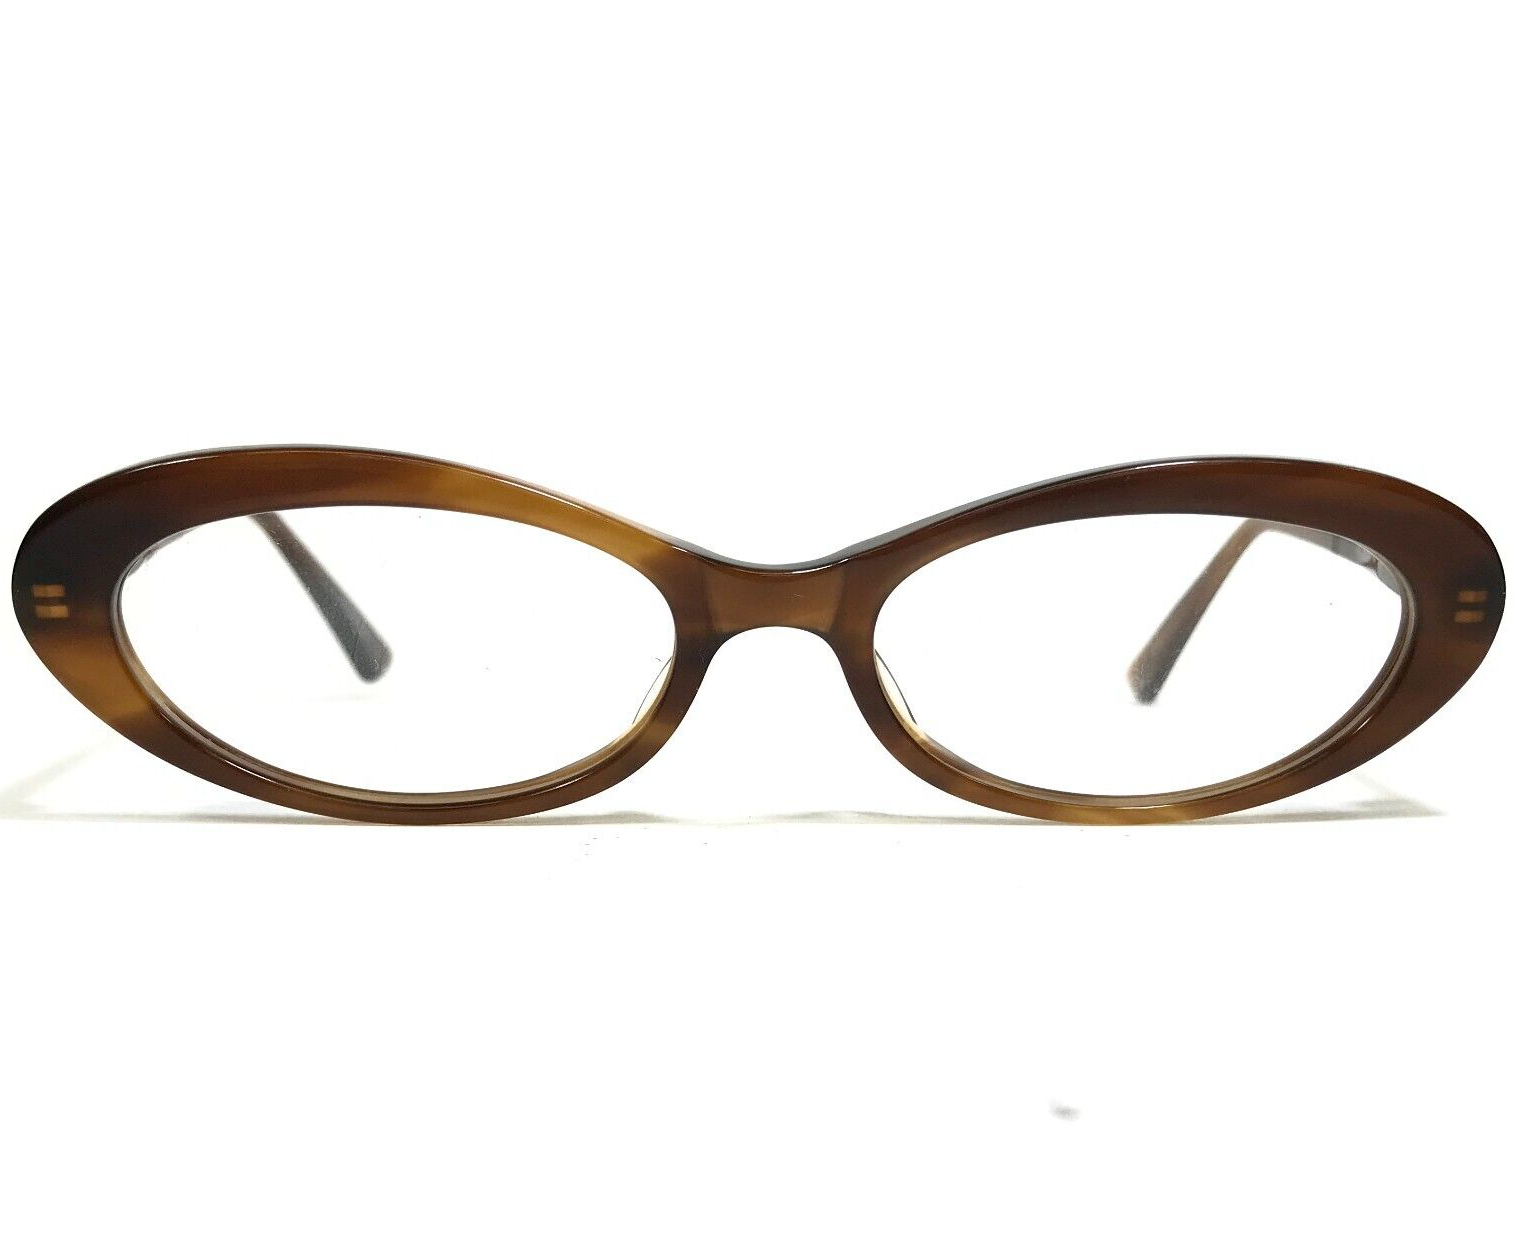 Primary image for Oliver Peoples Petite Eyeglasses Frames Dexi SYC Brown Horn Cat Eye 50-17-140